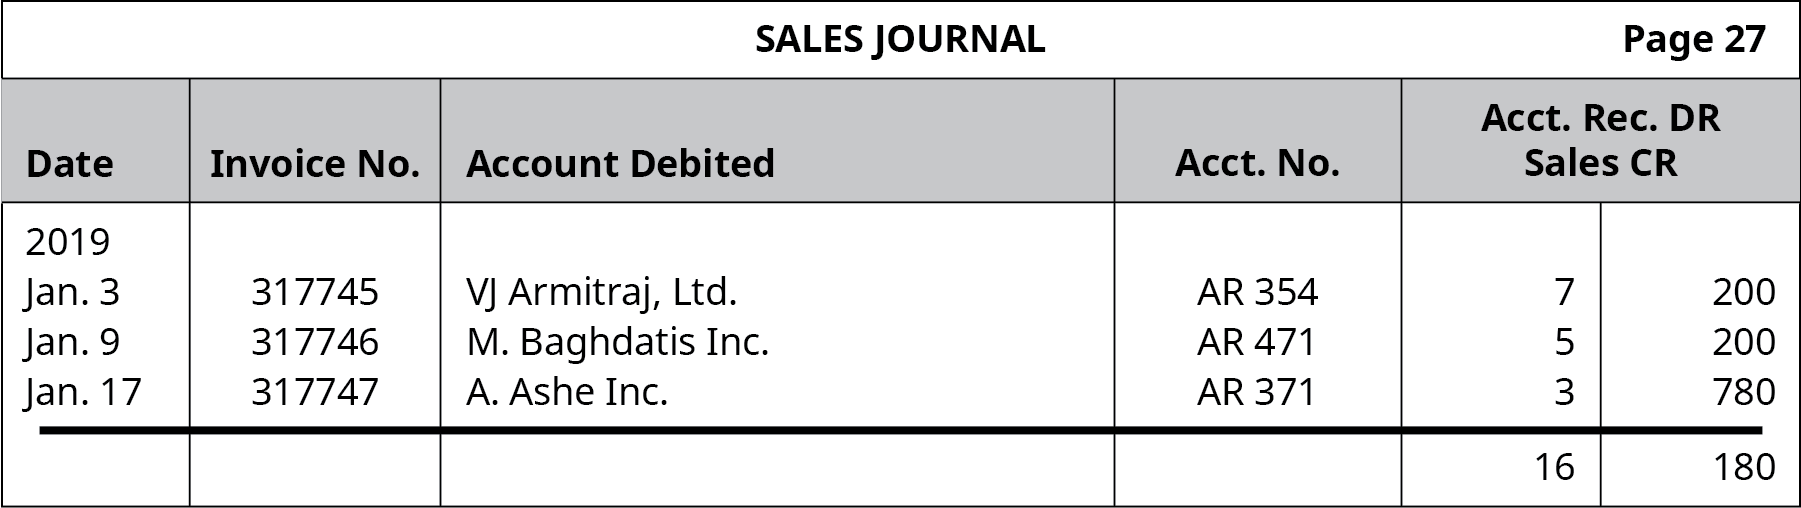 Sales Journal, page 27. Six columns, labeled left to right: Date, Invoice Number, Account Debited, Account Number, Accounts Receivable DR, Sales CR. Line One: January 3, 2019; 317745; VJ Armitraj, Ltd; AR 354; 7; 200. Line Two: January 9, 2019; 317746; M. Baghdatis Inc.; AR 471; 5; 200. Line Three: January 17, 2019; 317747; A. Ashe Inc.; AR 371; 3; 780. Line Four: Blank; Blank; Blank; Blank; 16; 180.